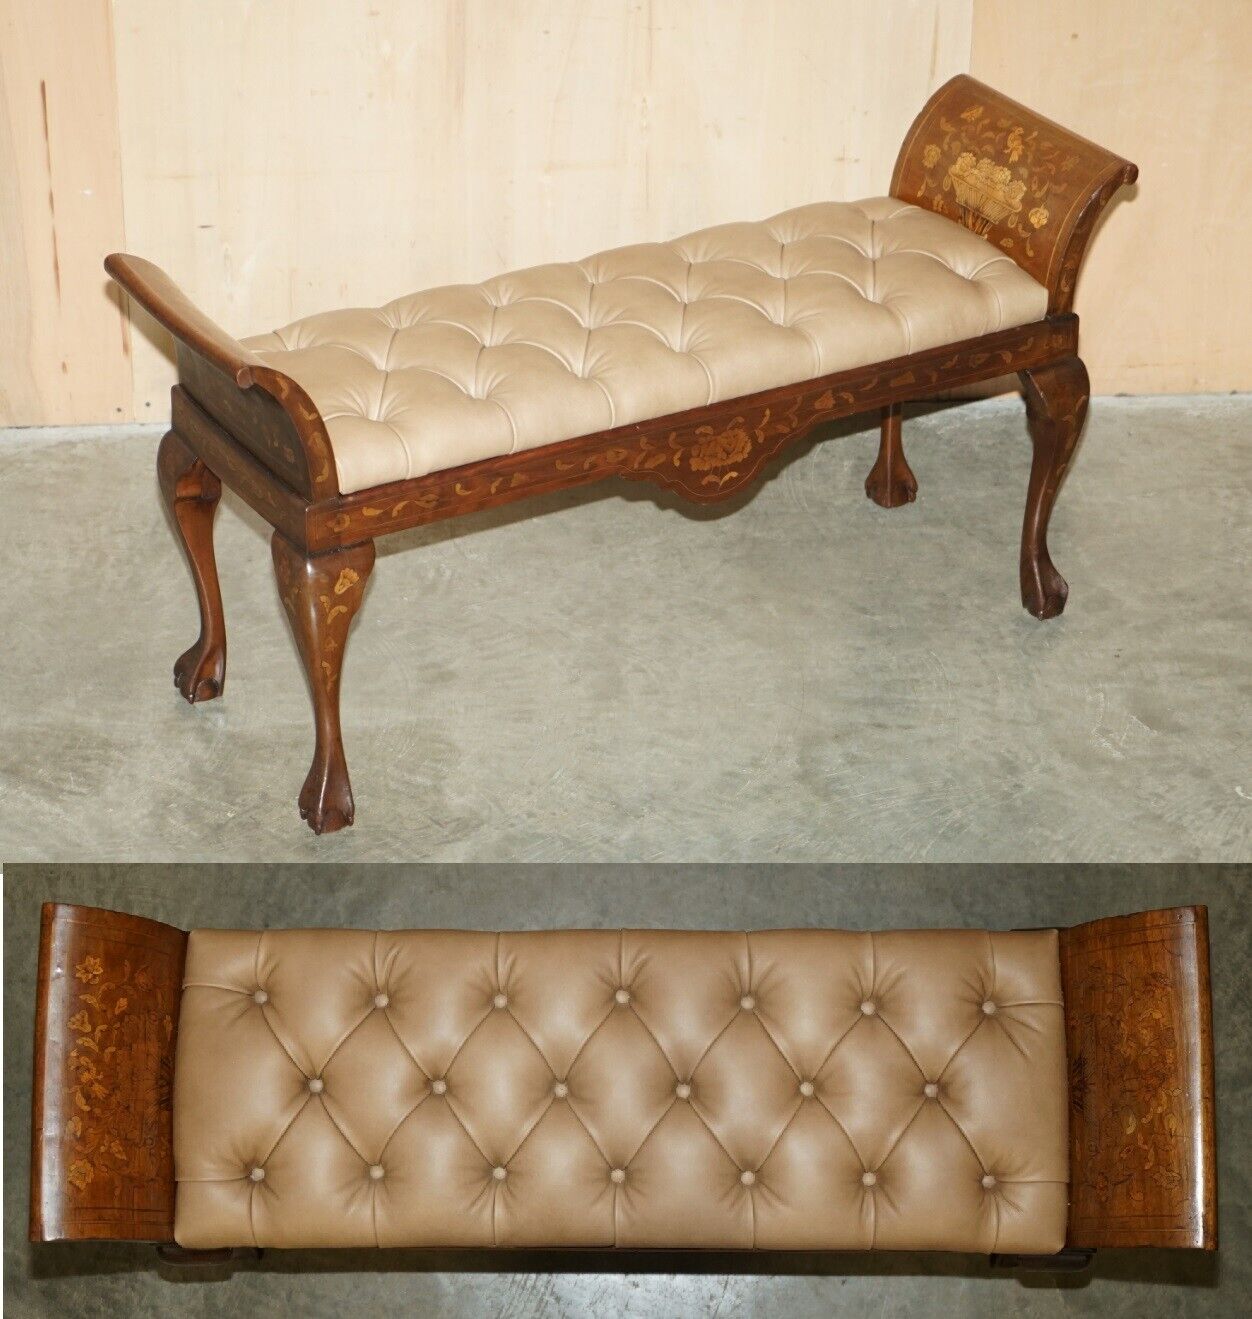 ANTIQUE DUTCH MARQUETRY INLAID CLAW & BALL FEET CHESTERFIELD BROWN LEATHER BENCH